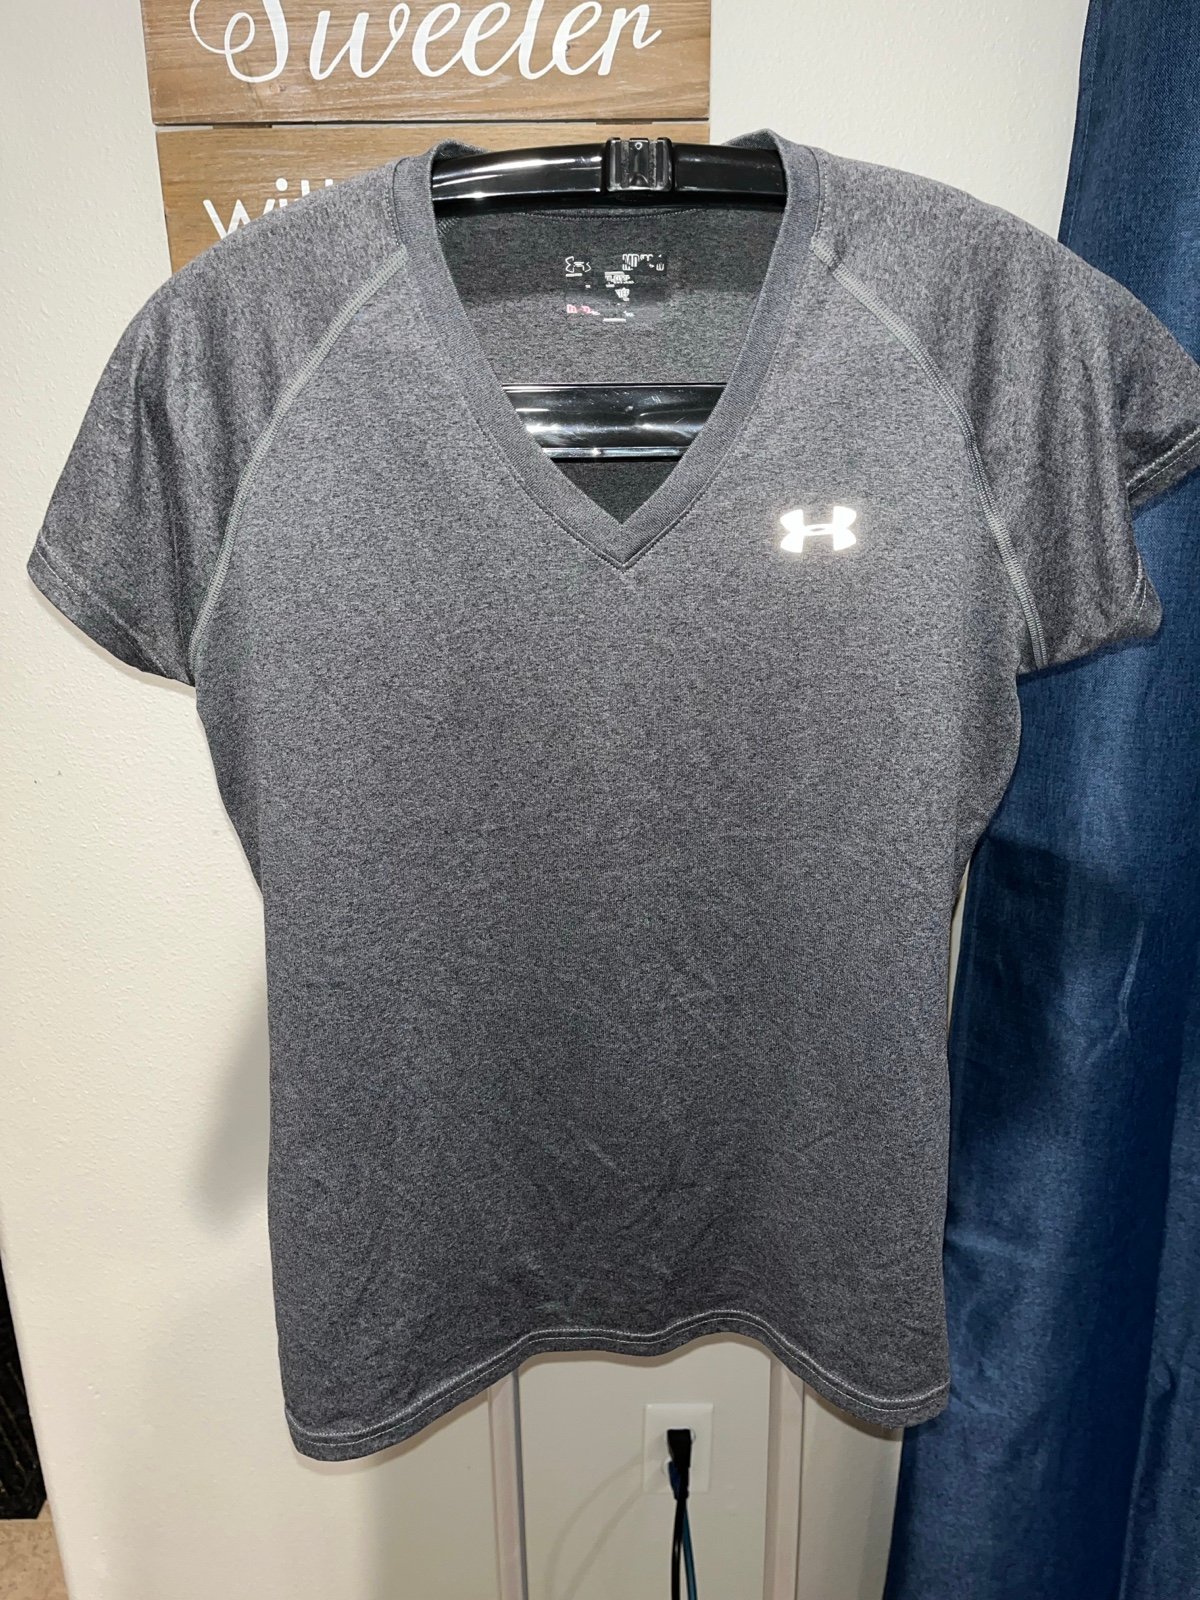 Under Armour Women’s Grey Short Sleeve Semi Fitted Shir